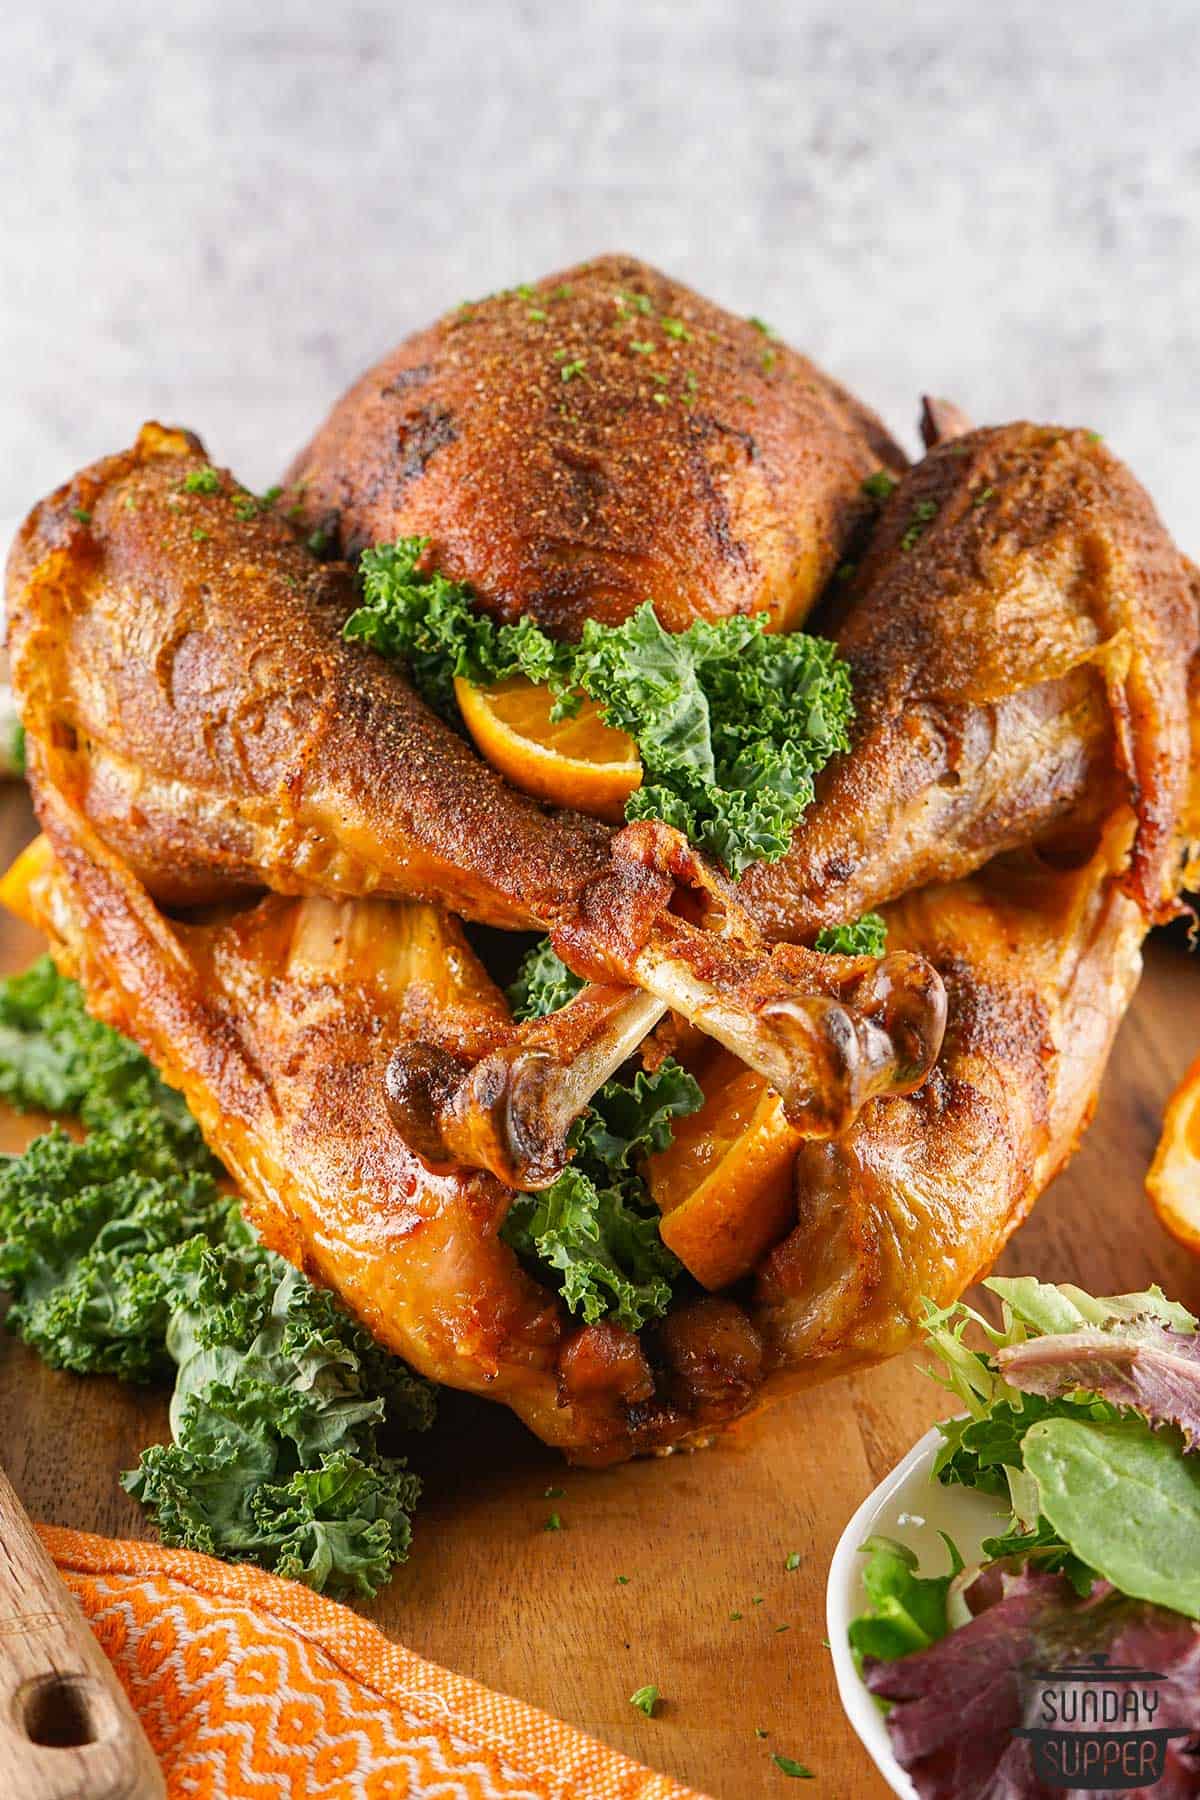 a roasted and fried cajun turkey with parsley and oranges